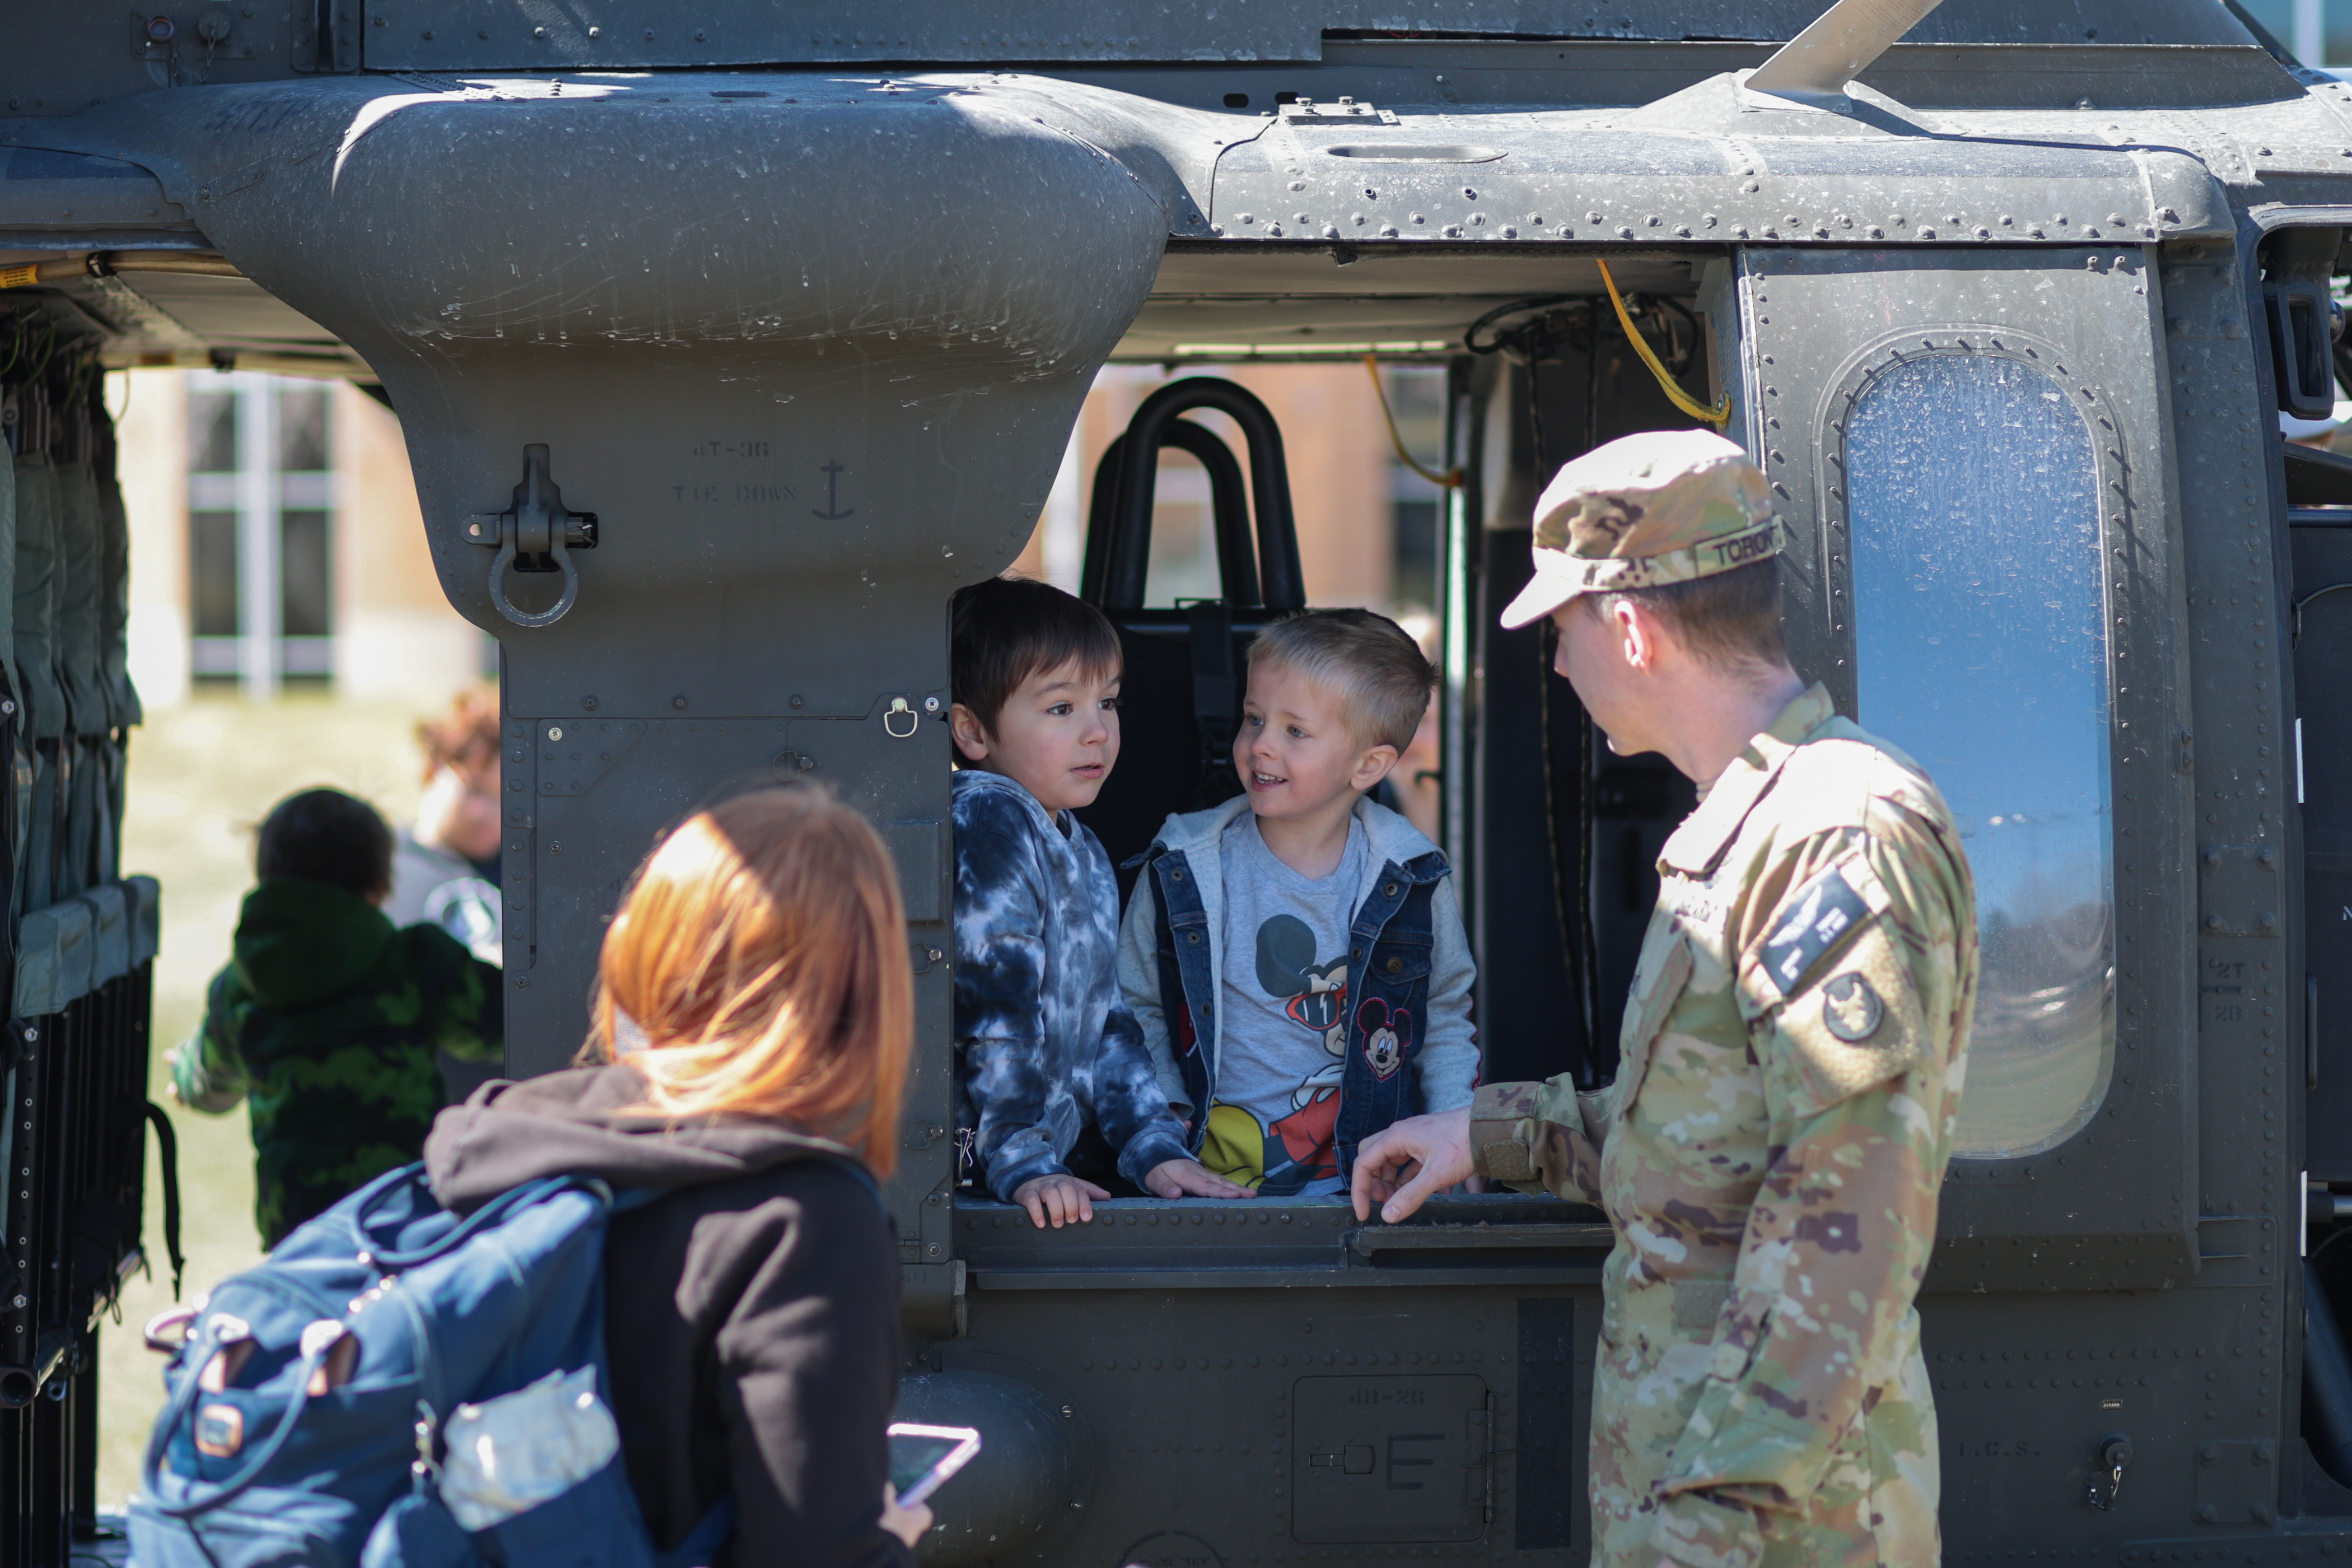 Small children enjoy a helicopter on campus at ISU